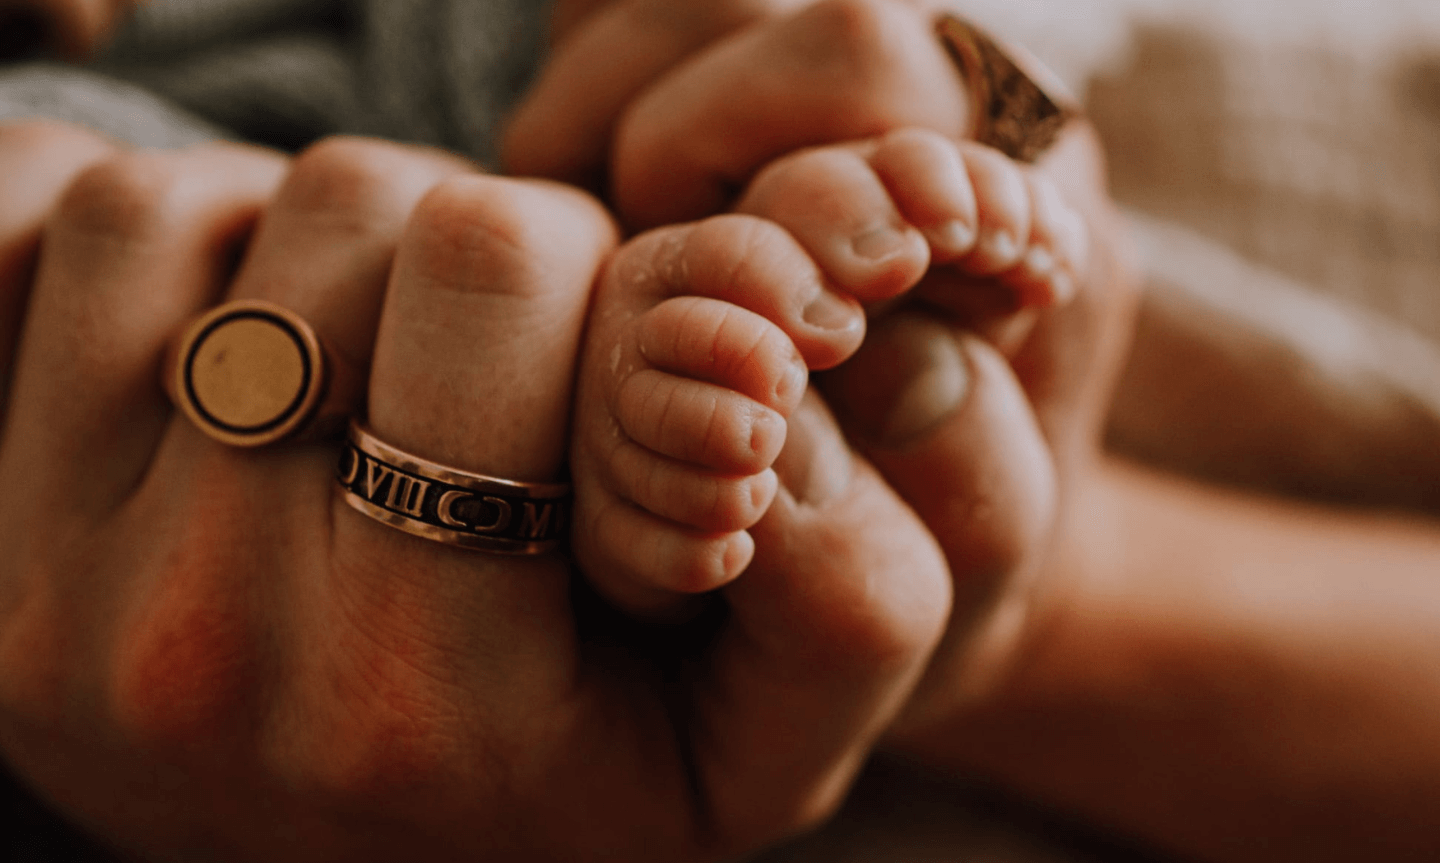 Man's hands wrapped around a babies foot. He's wearing a gold signet ring and band ring. The Number One Men's Jewelry Gift for Fathers-to-Be.